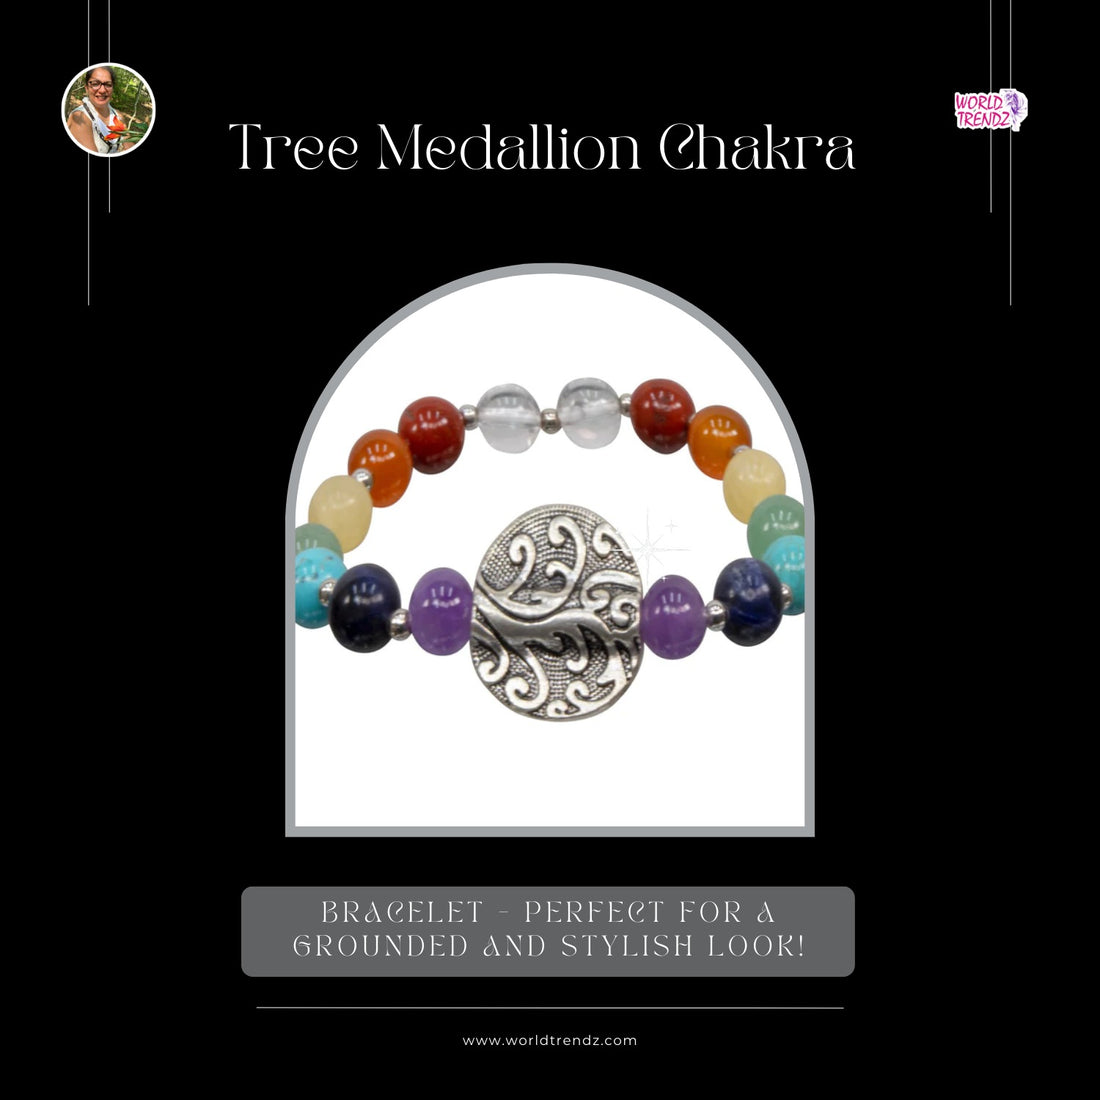 Unlock Your Spiritual Energy with the Tree Medallion Chakra Bracelet - The Perfect Accessory for Mindfulness and Balance!